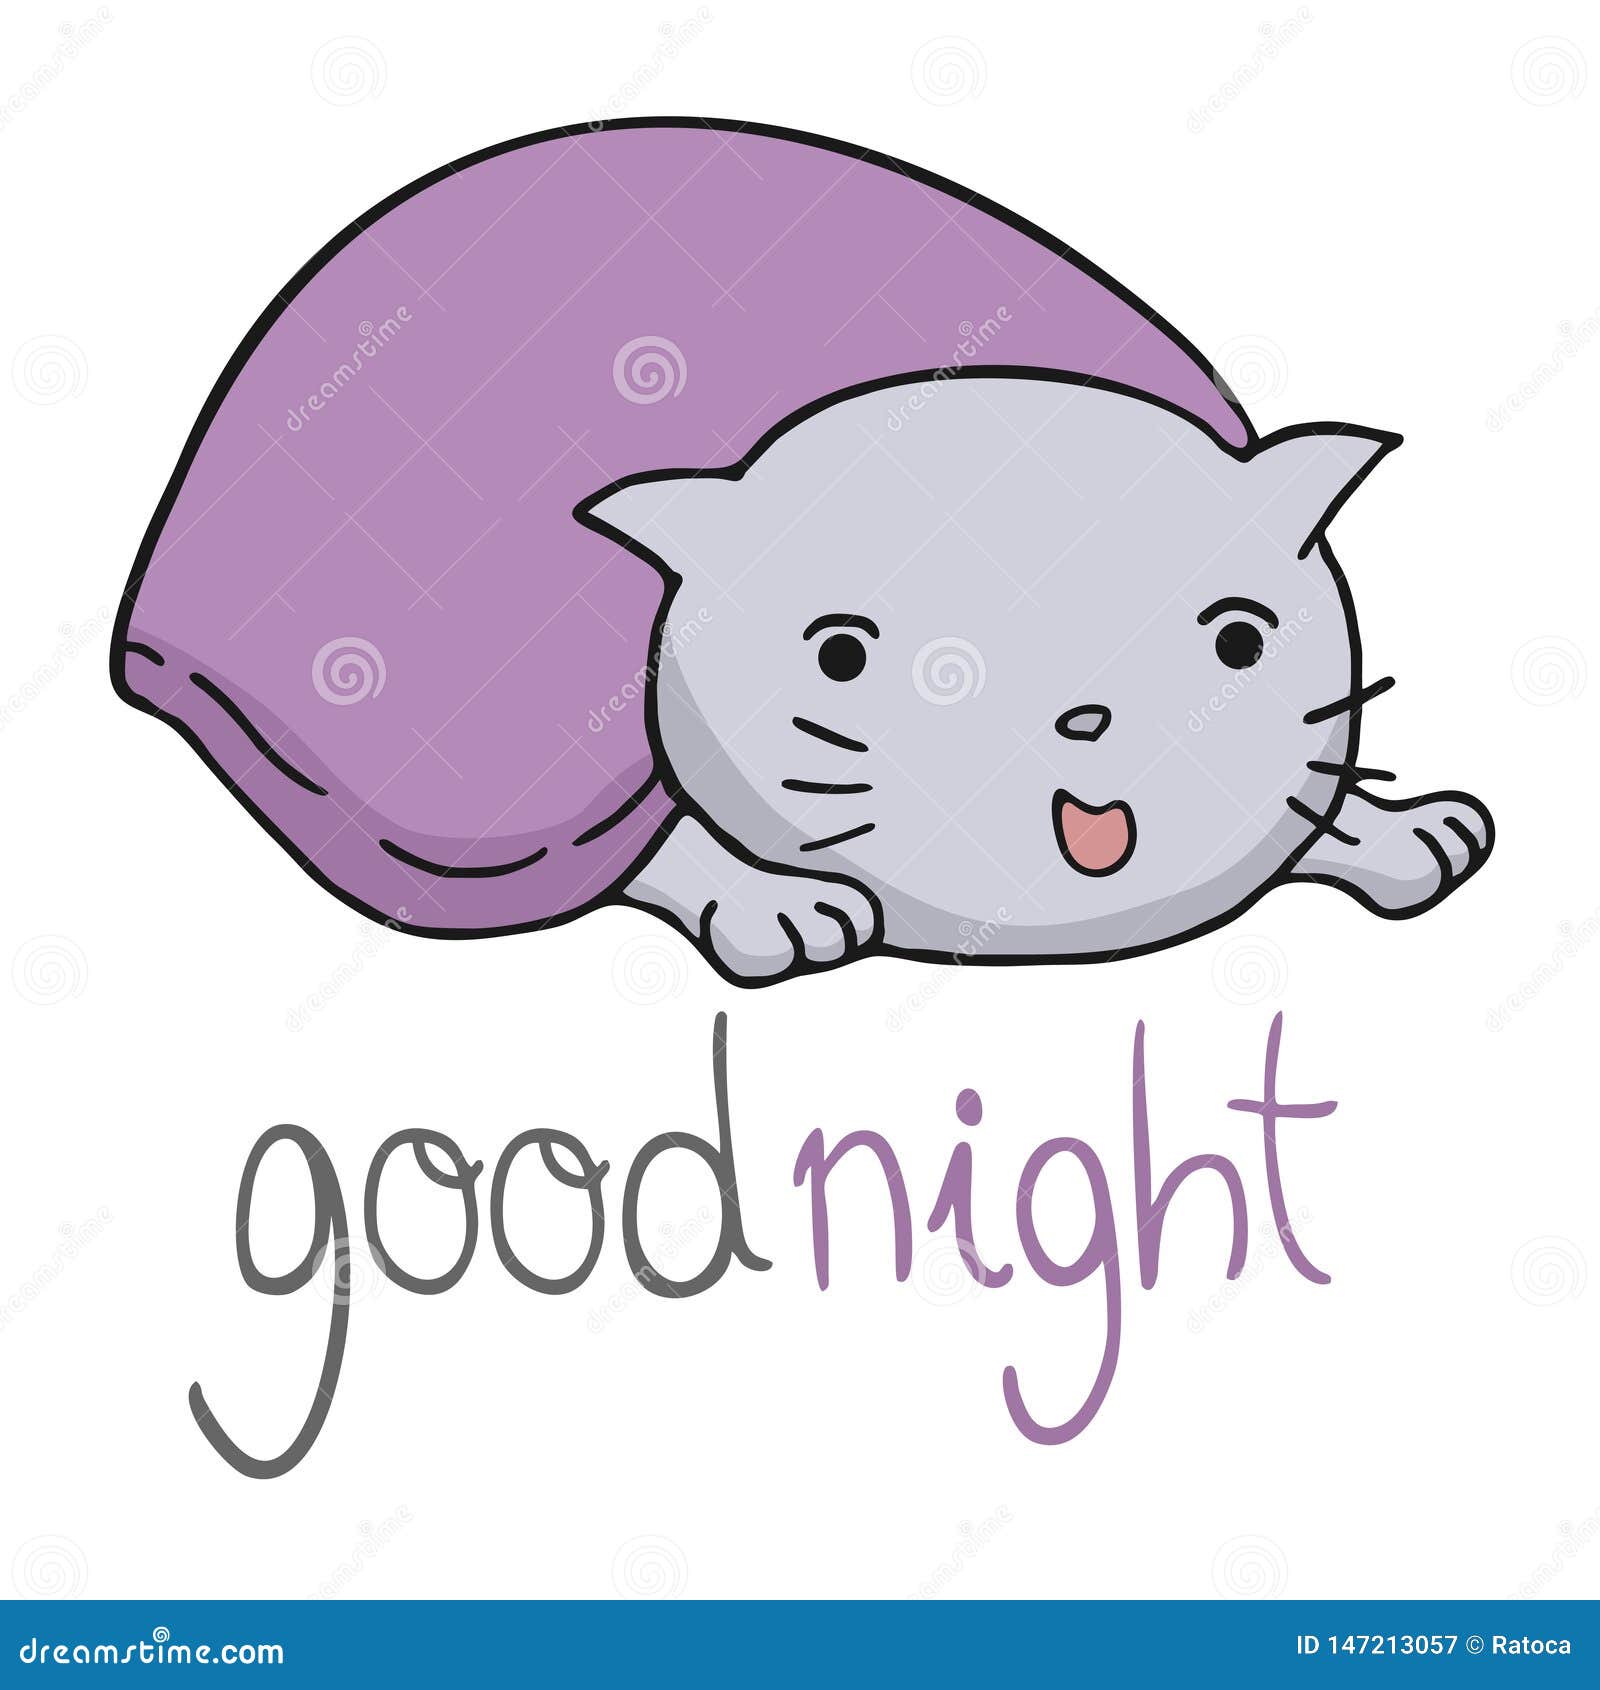 Funny Cat and Good Night Message Stock Vector - Illustration of character,  design: 147213057